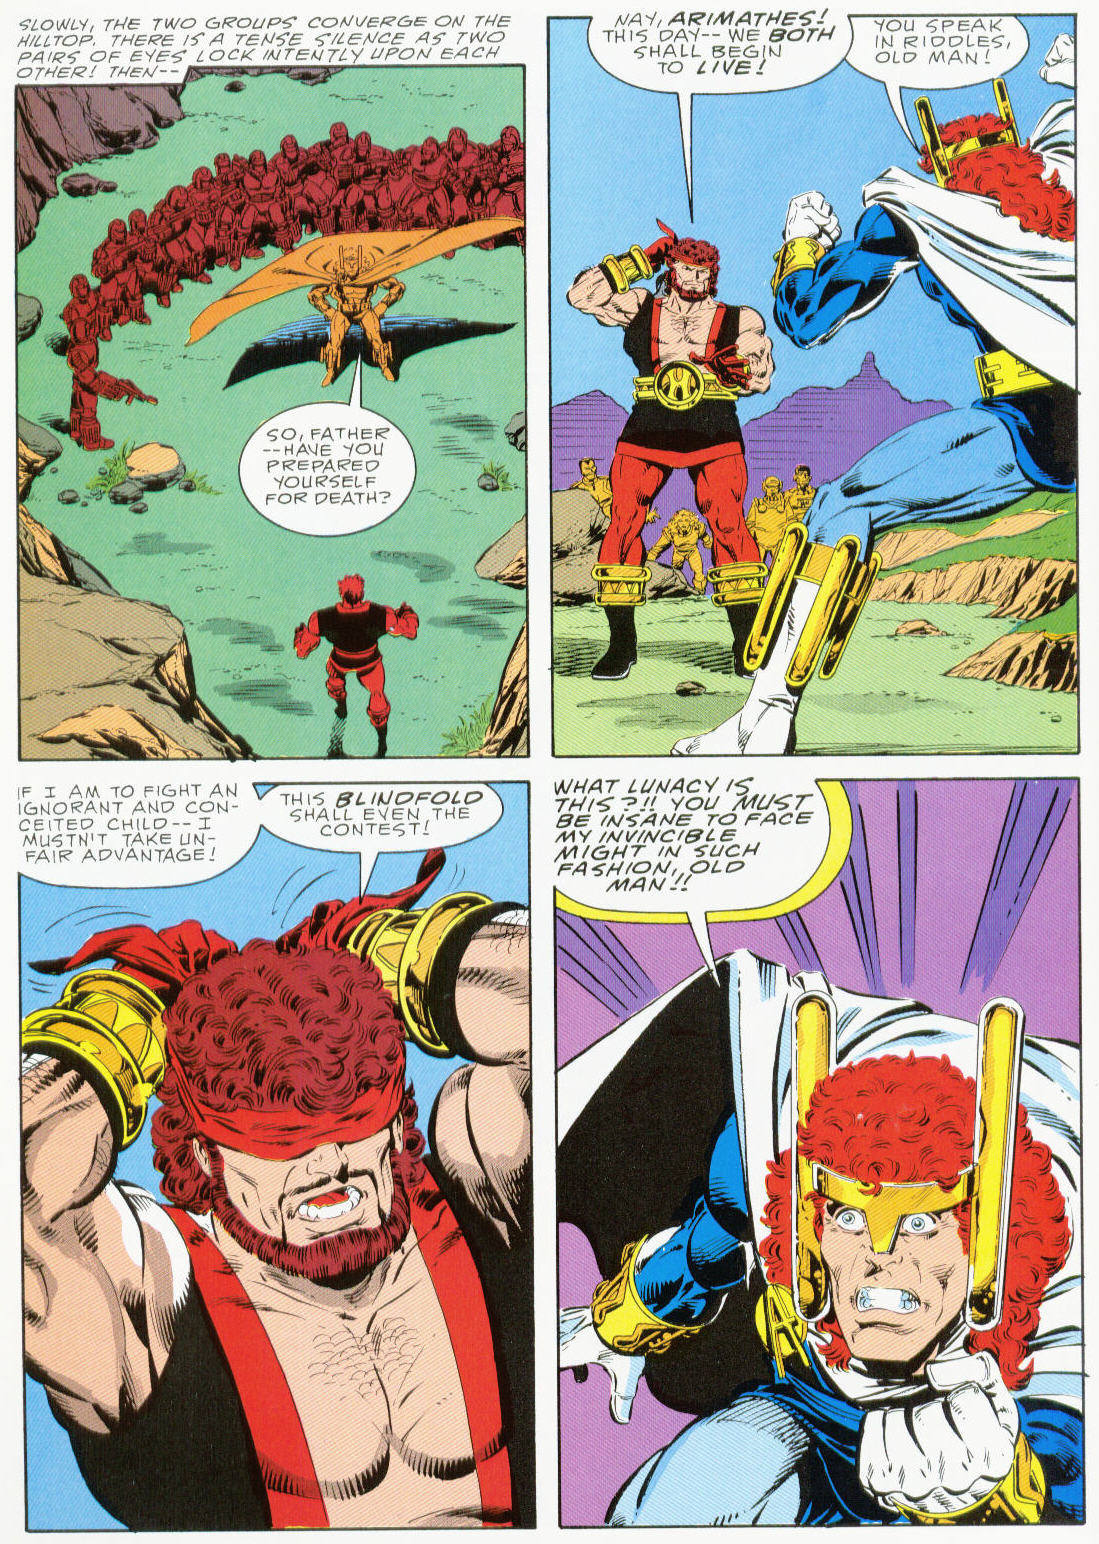 Marvel Graphic Novel issue 37 - Hercules Prince of Power - Full Circle - Page 66